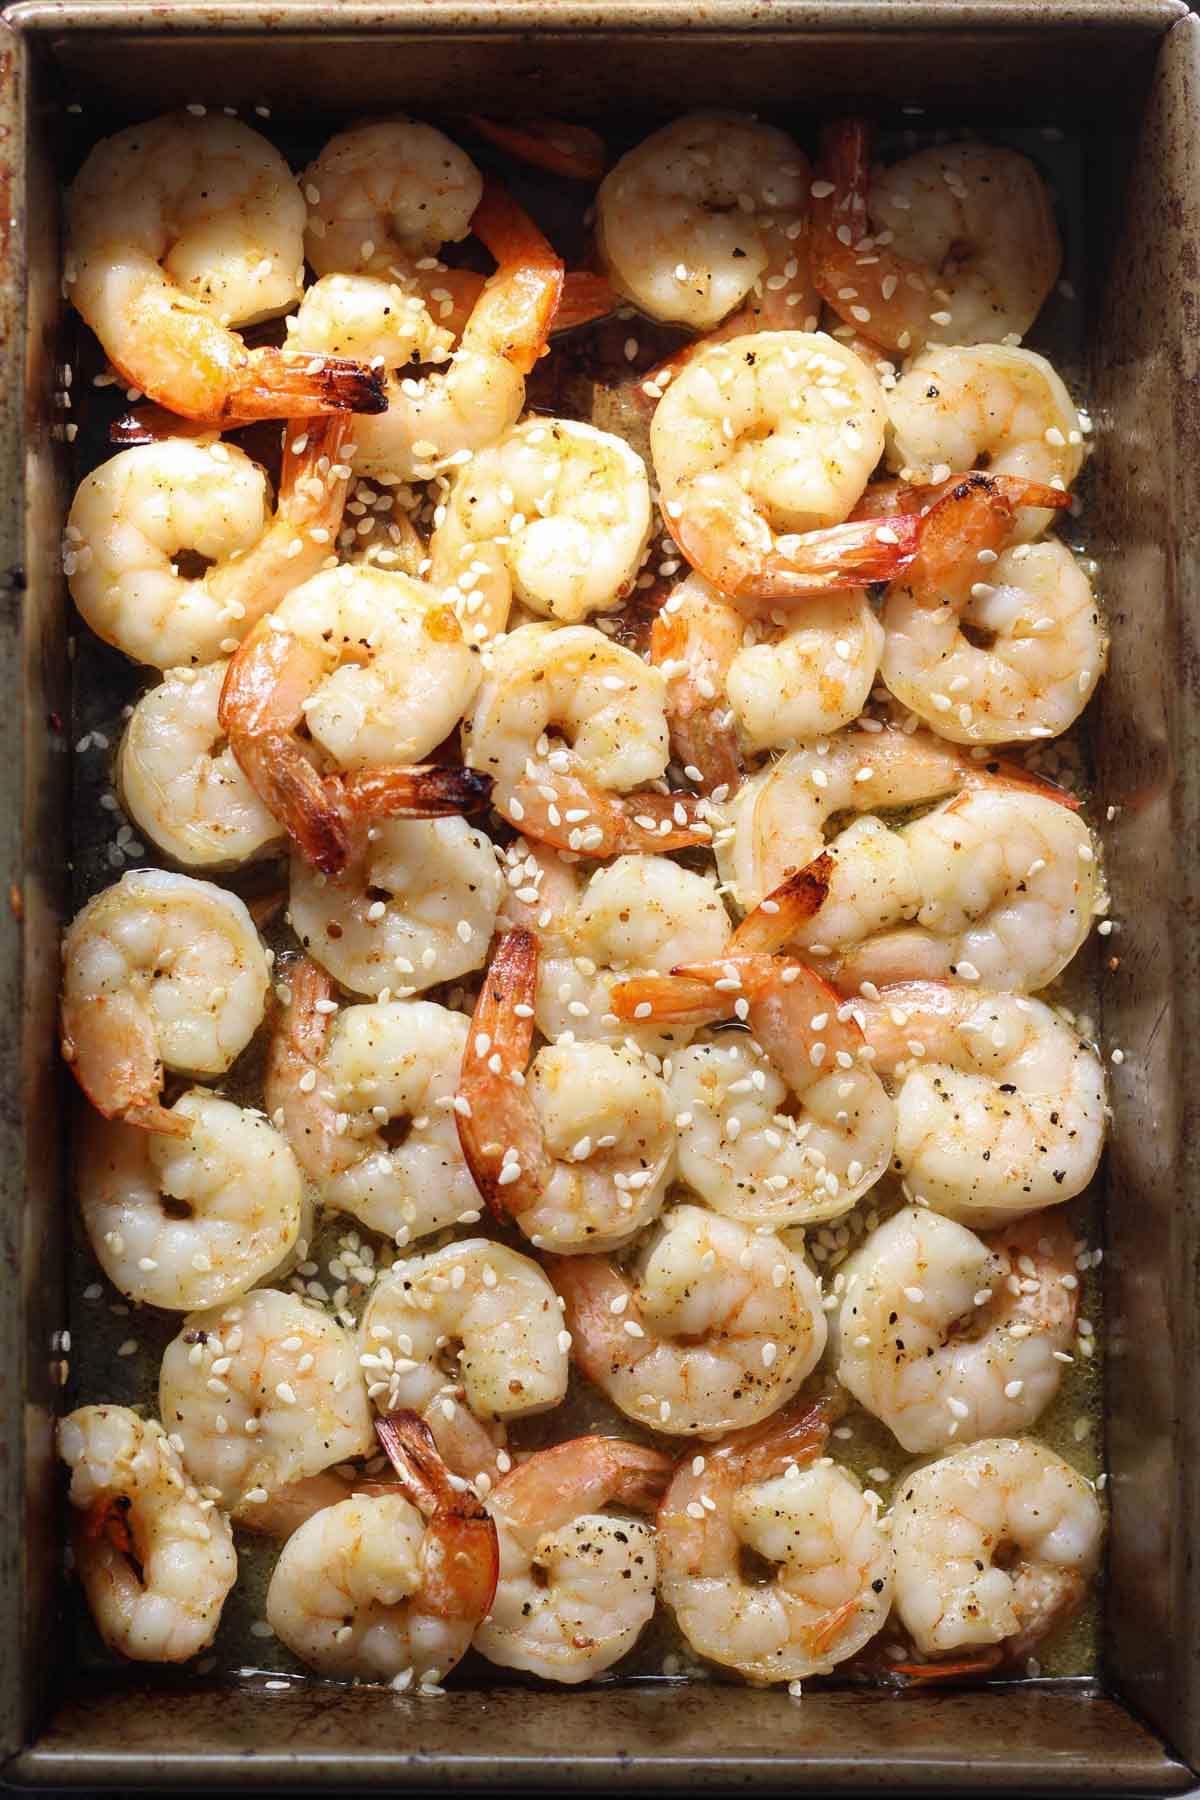 Shrimp baked in a pan